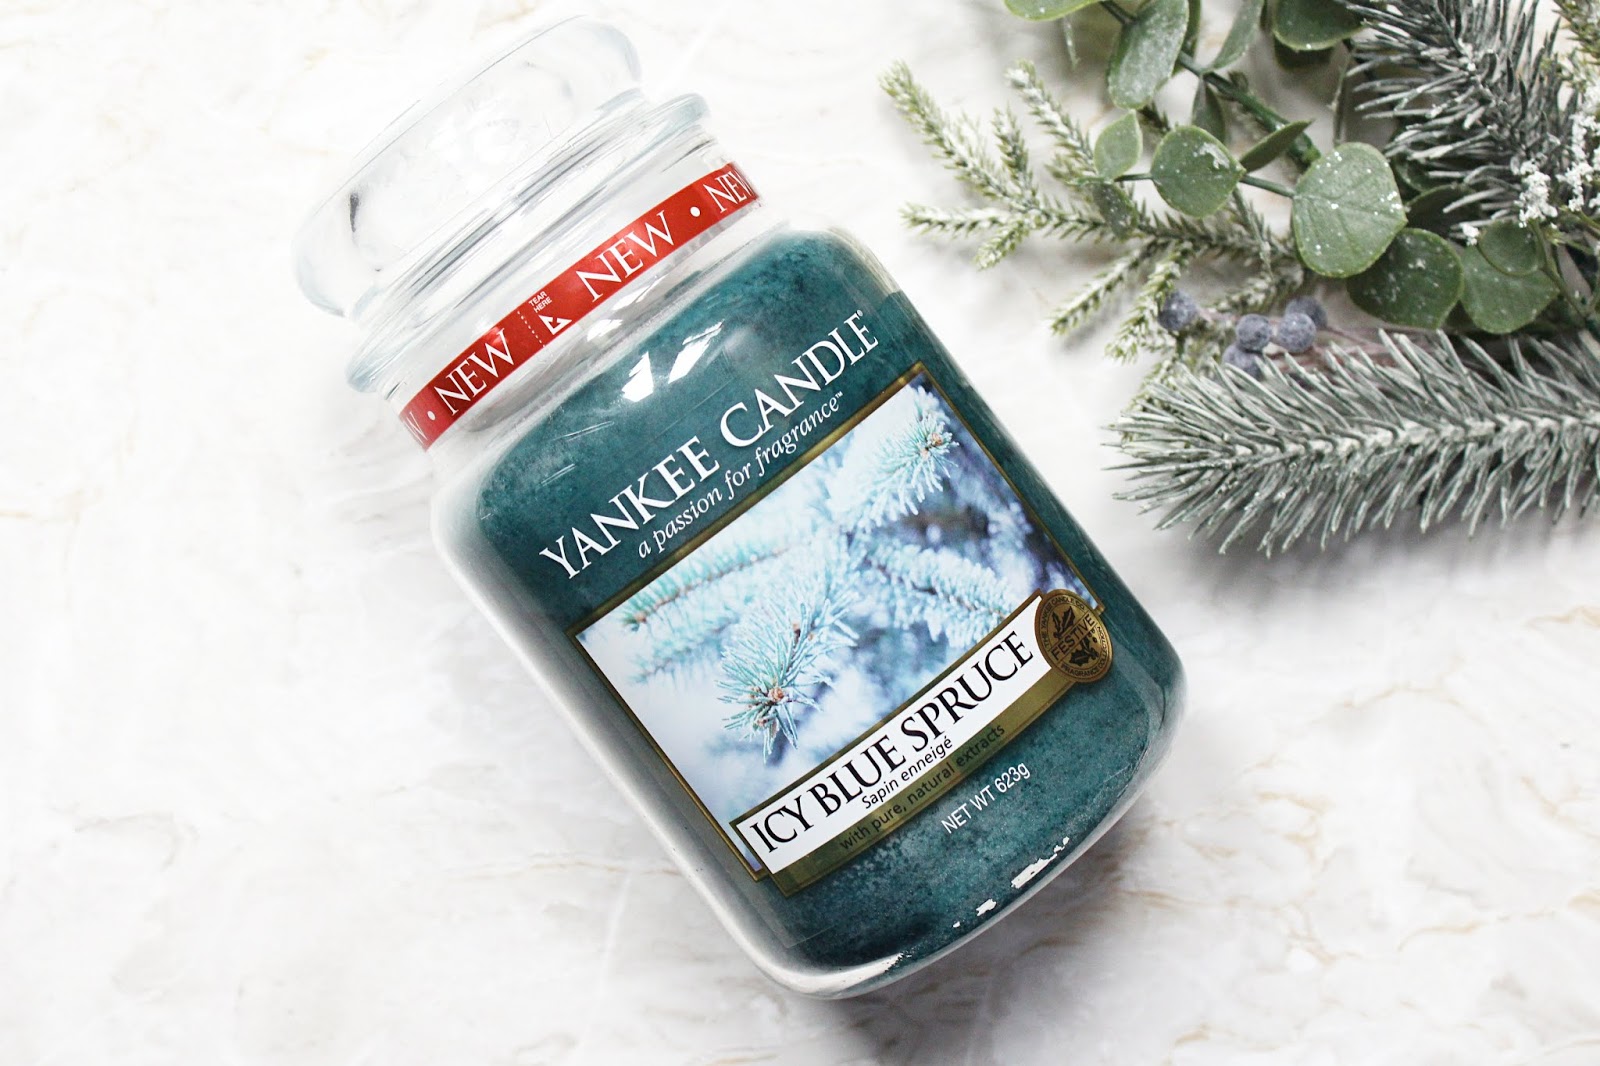 Yankee Candle Icy Blue Spruce Candle Review 